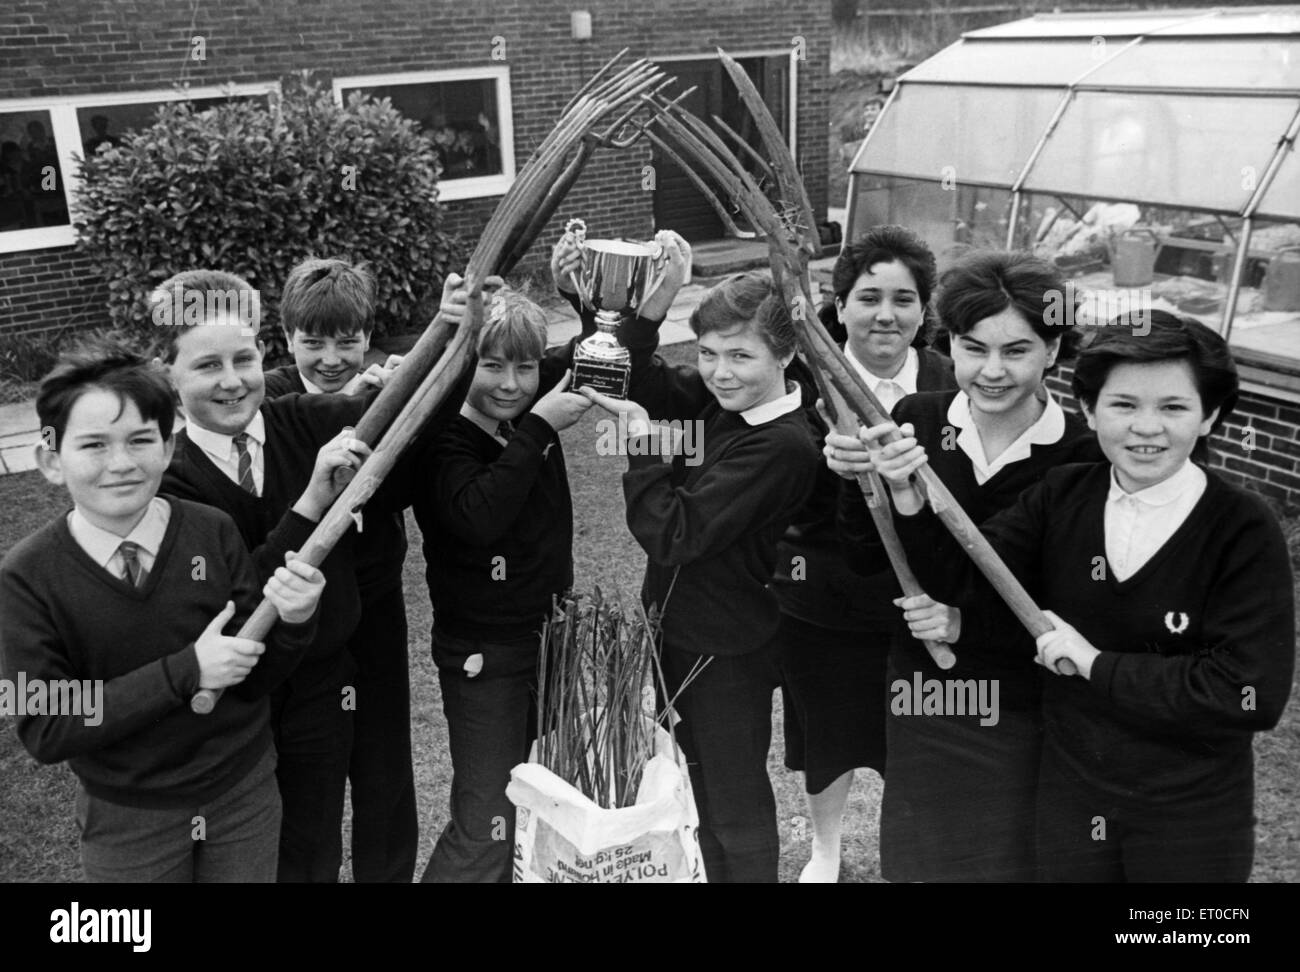 Lee Towse, centre left, and Jane Battram, centre right, proudly display the 1985/86 Cleveland Area Keep Britain Tidy Award for Nunthorpe School. Pictured with them are other member sod the school's Tidy Club, David Atkinson, Michael Greenwell, Jeff Smith, Joanne Parsons, Joanne Harris and Suzanne Harris. 14th April 1986. Stock Photo